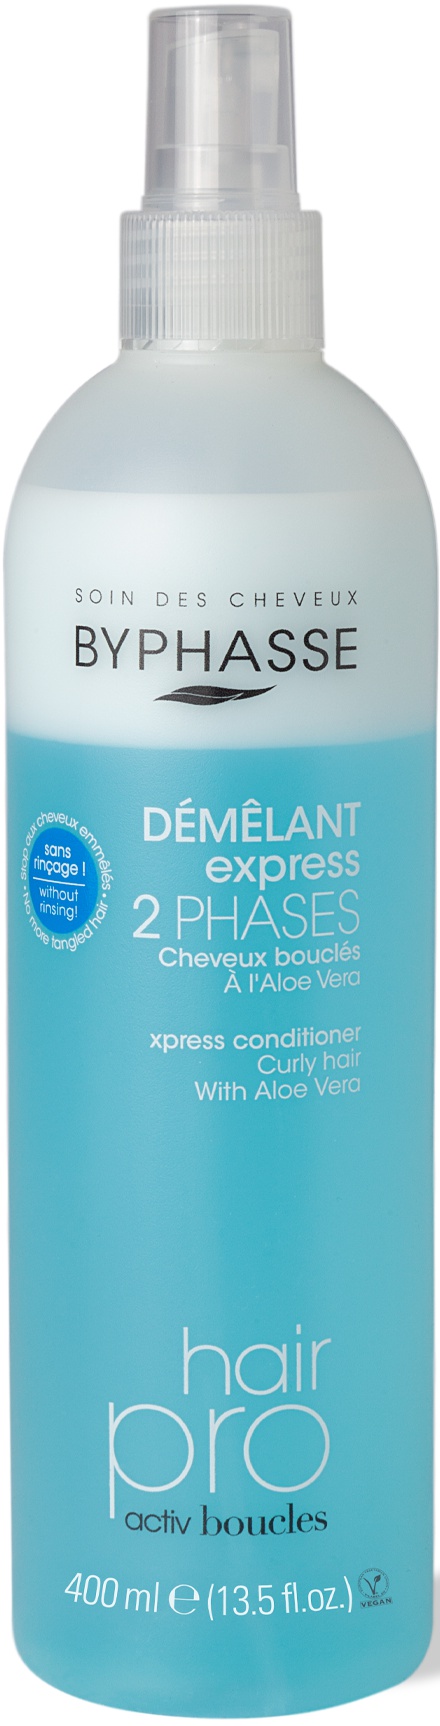 Byphasse Xpress Conditioner Activ Boucles